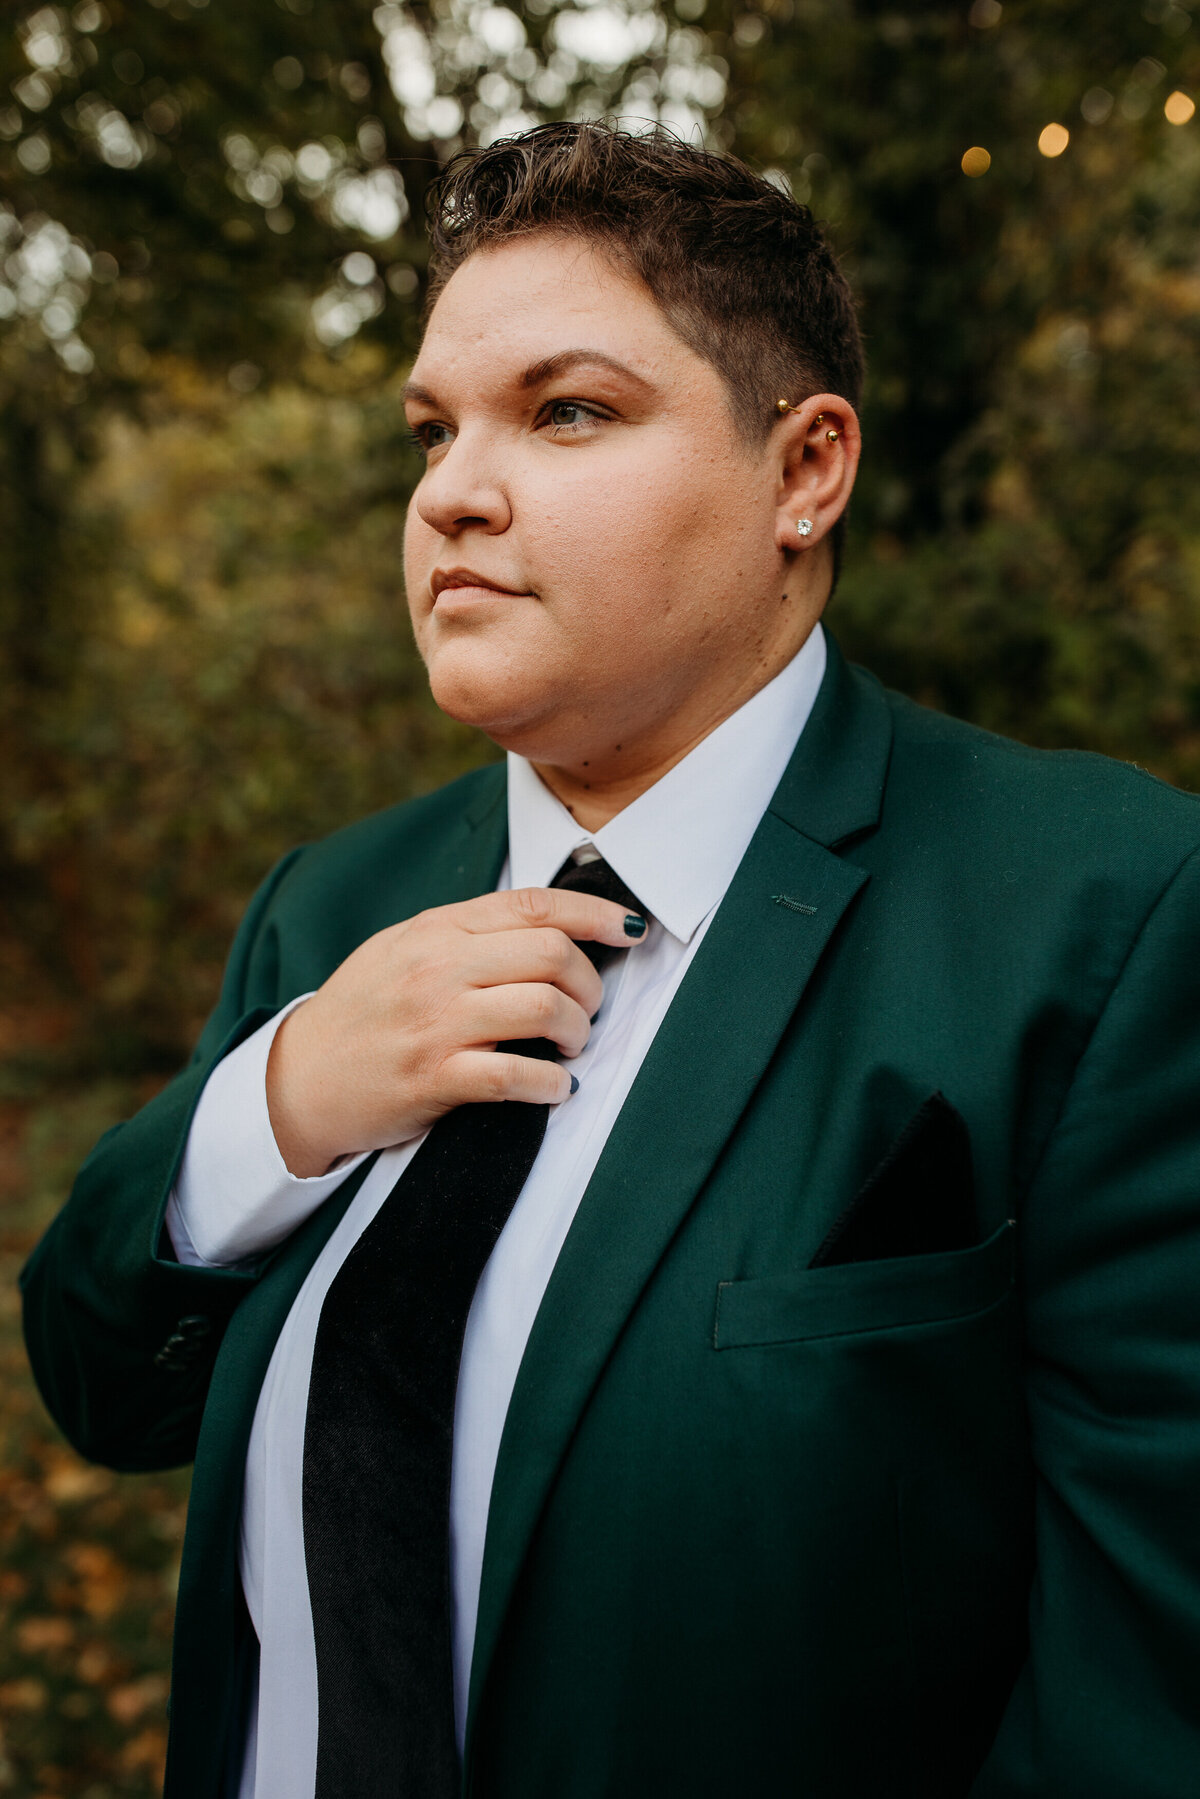 Confident individual in a green suit adjusting their tie, looking off into the distance